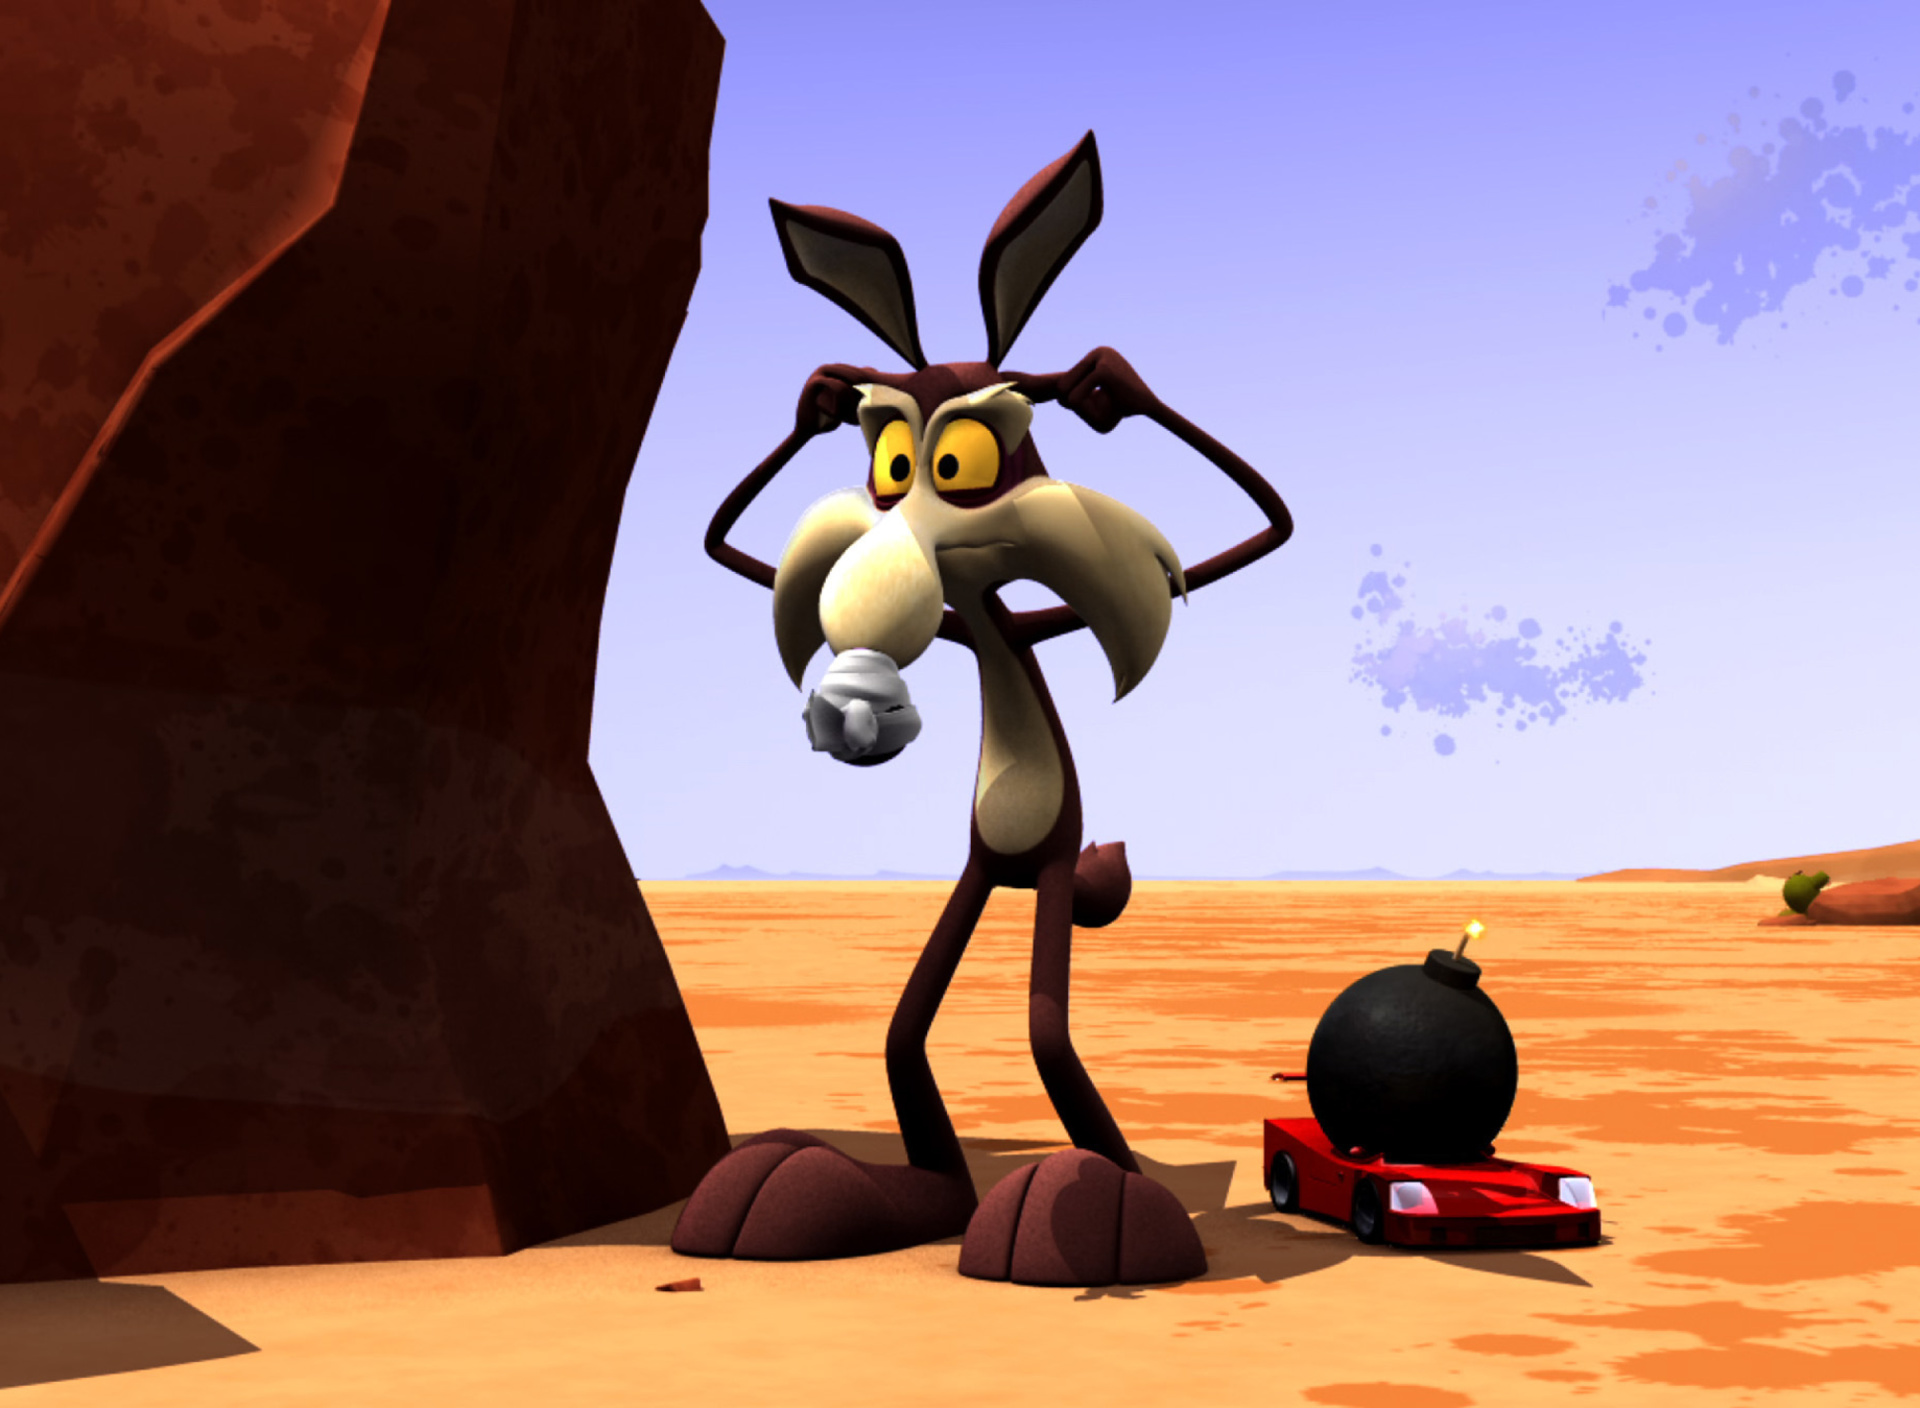 Wile E Coyote and Road Runner wallpaper 1920x1408